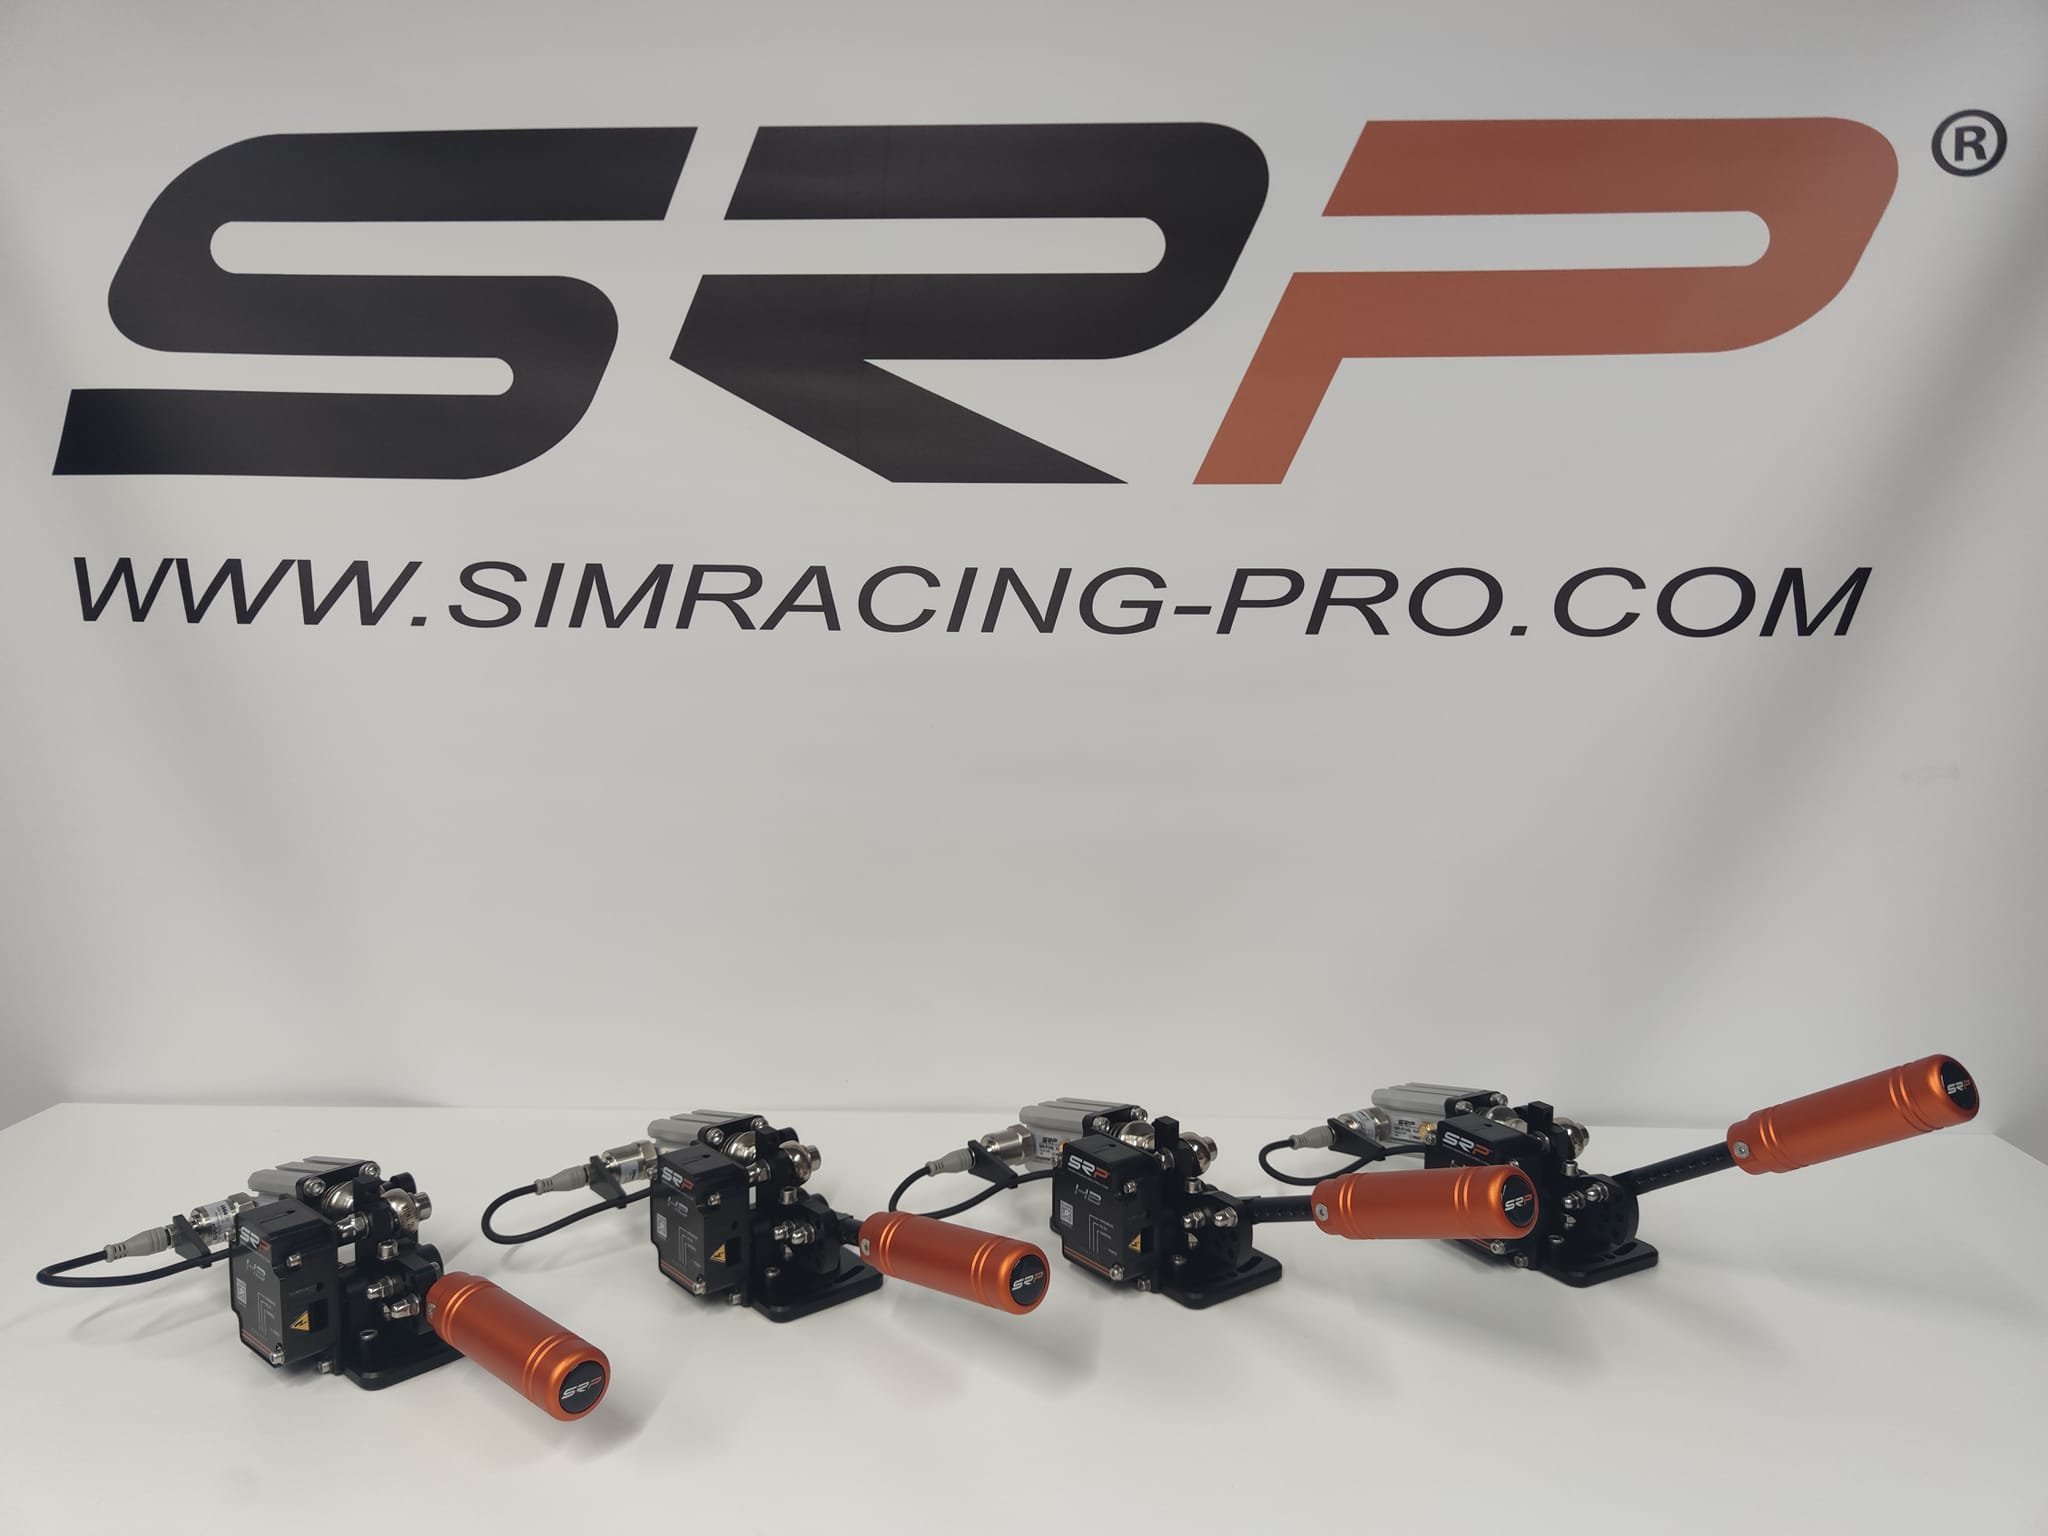 More information about "SRP HB Handbrake: nuovo freno a mano by Sim Racing Pro"